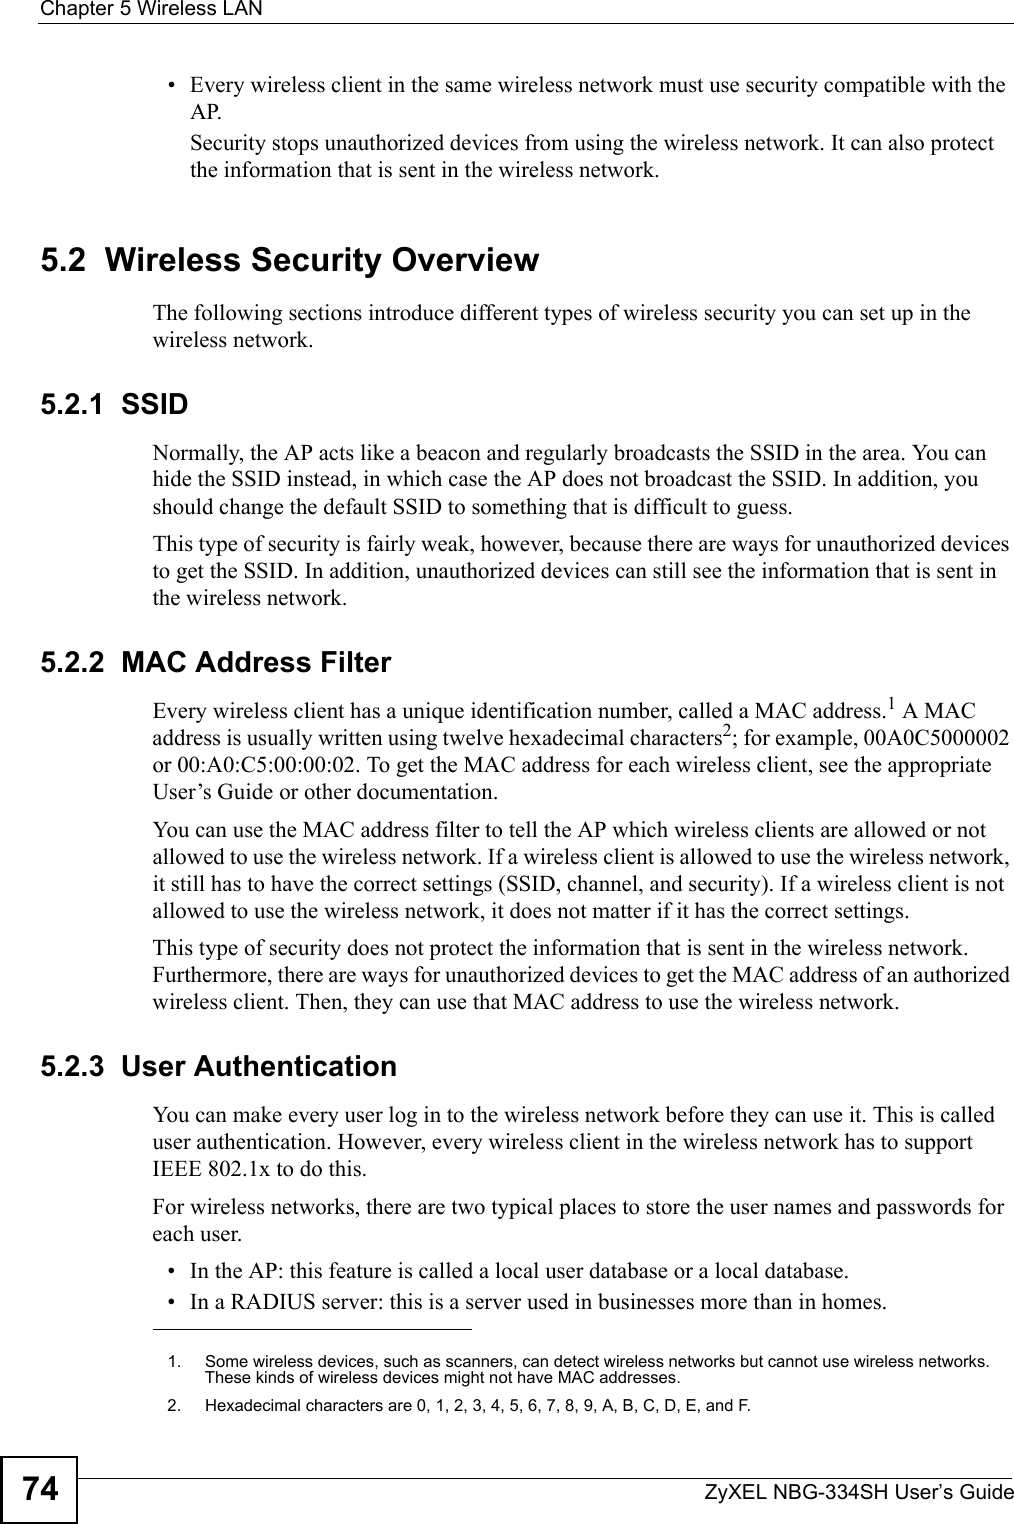 Chapter 5 Wireless LANZyXEL NBG-334SH User’s Guide74• Every wireless client in the same wireless network must use security compatible with the AP.Security stops unauthorized devices from using the wireless network. It can also protect the information that is sent in the wireless network.5.2  Wireless Security OverviewThe following sections introduce different types of wireless security you can set up in the wireless network.5.2.1  SSIDNormally, the AP acts like a beacon and regularly broadcasts the SSID in the area. You can hide the SSID instead, in which case the AP does not broadcast the SSID. In addition, you should change the default SSID to something that is difficult to guess.This type of security is fairly weak, however, because there are ways for unauthorized devices to get the SSID. In addition, unauthorized devices can still see the information that is sent in the wireless network.5.2.2  MAC Address FilterEvery wireless client has a unique identification number, called a MAC address.1 A MAC address is usually written using twelve hexadecimal characters2; for example, 00A0C5000002 or 00:A0:C5:00:00:02. To get the MAC address for each wireless client, see the appropriate User’s Guide or other documentation.You can use the MAC address filter to tell the AP which wireless clients are allowed or not allowed to use the wireless network. If a wireless client is allowed to use the wireless network, it still has to have the correct settings (SSID, channel, and security). If a wireless client is not allowed to use the wireless network, it does not matter if it has the correct settings.This type of security does not protect the information that is sent in the wireless network. Furthermore, there are ways for unauthorized devices to get the MAC address of an authorized wireless client. Then, they can use that MAC address to use the wireless network.5.2.3  User AuthenticationYou can make every user log in to the wireless network before they can use it. This is called user authentication. However, every wireless client in the wireless network has to support IEEE 802.1x to do this.For wireless networks, there are two typical places to store the user names and passwords for each user.• In the AP: this feature is called a local user database or a local database.• In a RADIUS server: this is a server used in businesses more than in homes.1. Some wireless devices, such as scanners, can detect wireless networks but cannot use wireless networks. These kinds of wireless devices might not have MAC addresses.2. Hexadecimal characters are 0, 1, 2, 3, 4, 5, 6, 7, 8, 9, A, B, C, D, E, and F.